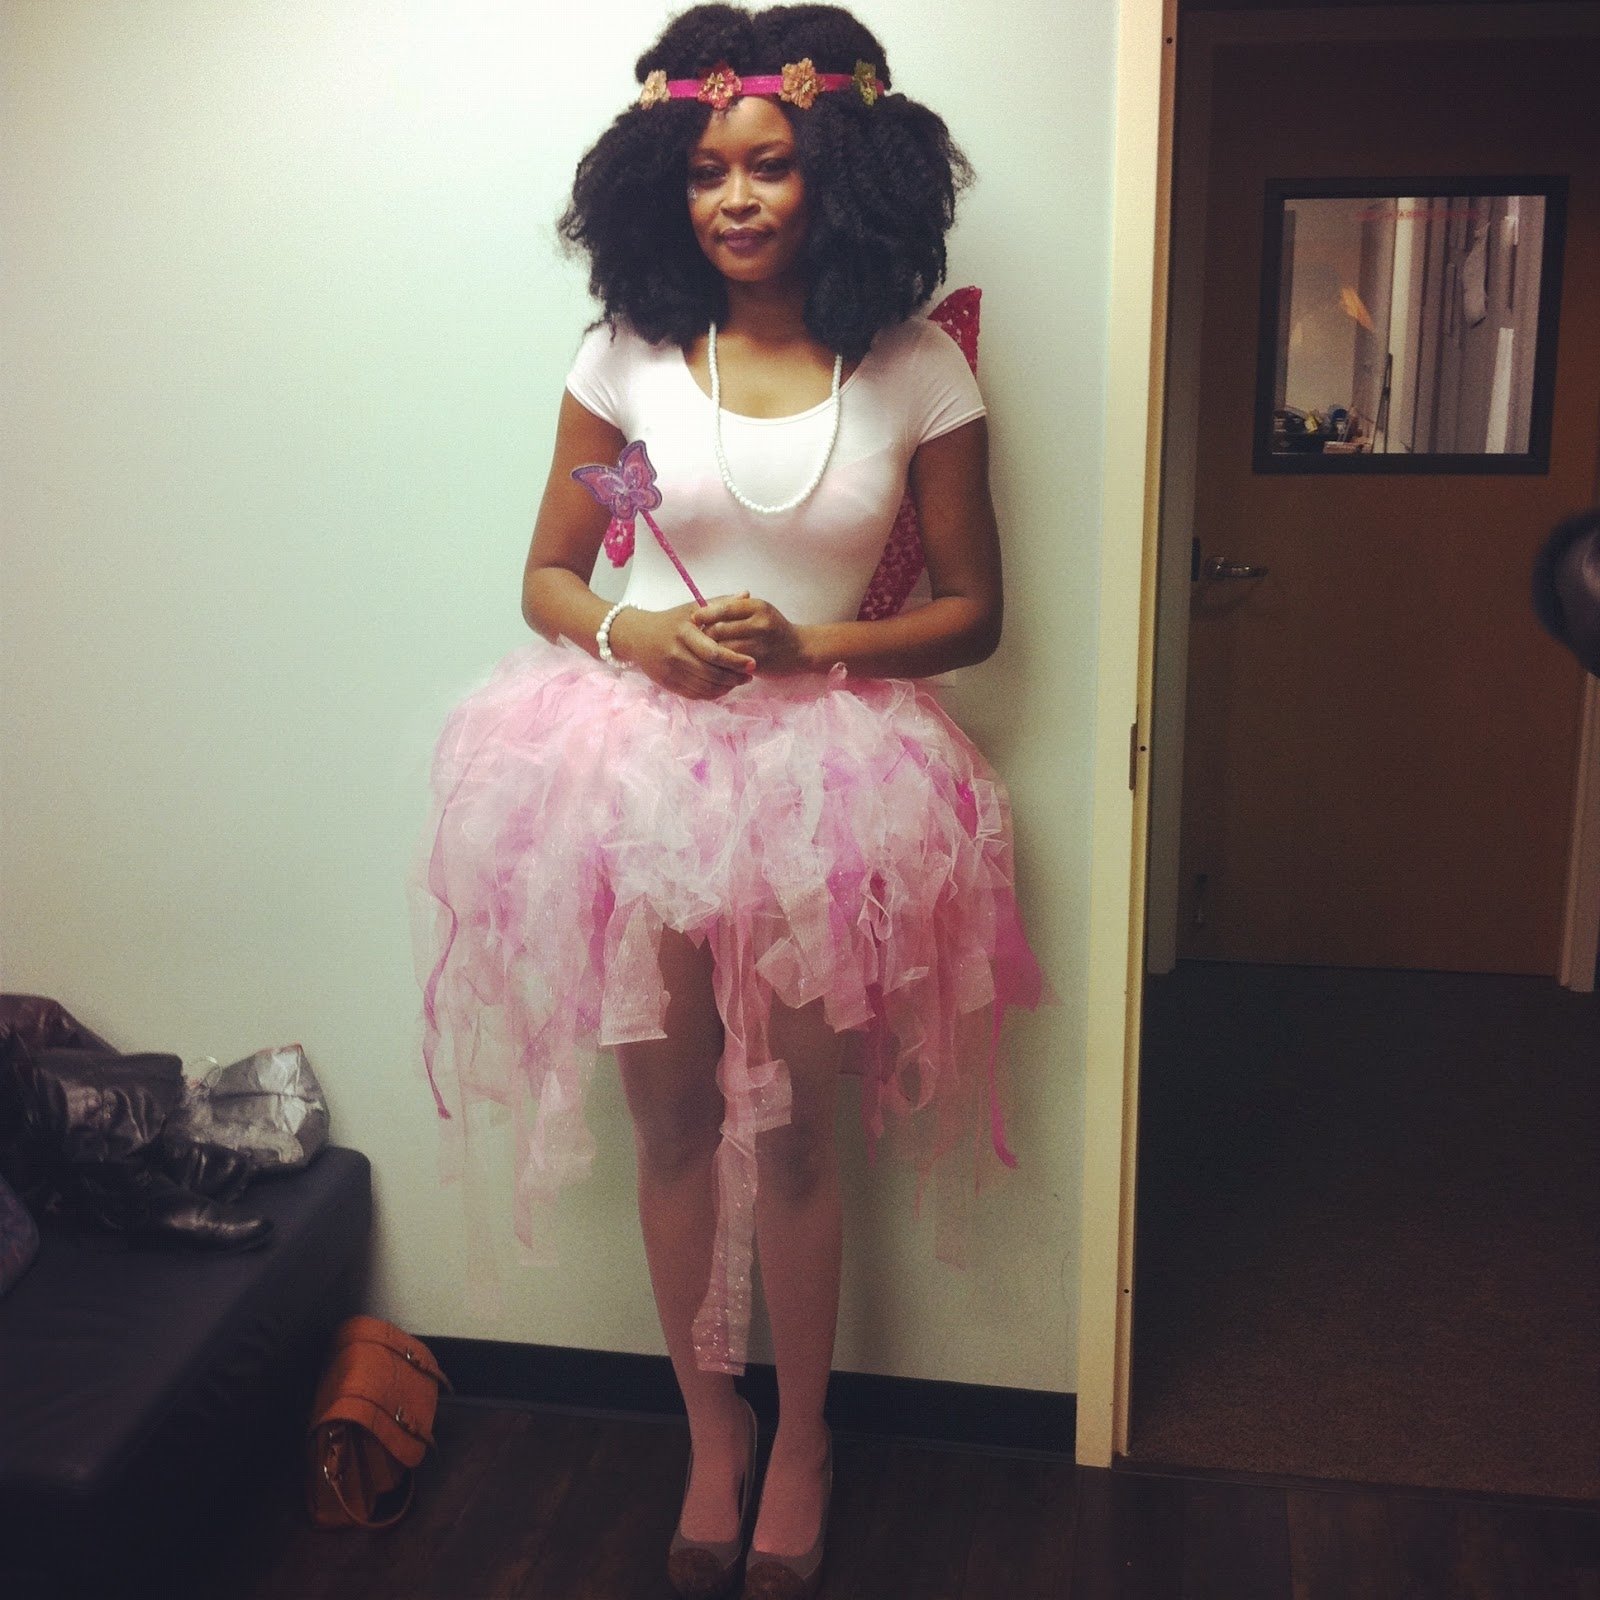 10 Lovely Tutu Costume Ideas For Adults 5 diy halloween costume ideas under 5 roserags 1 2022